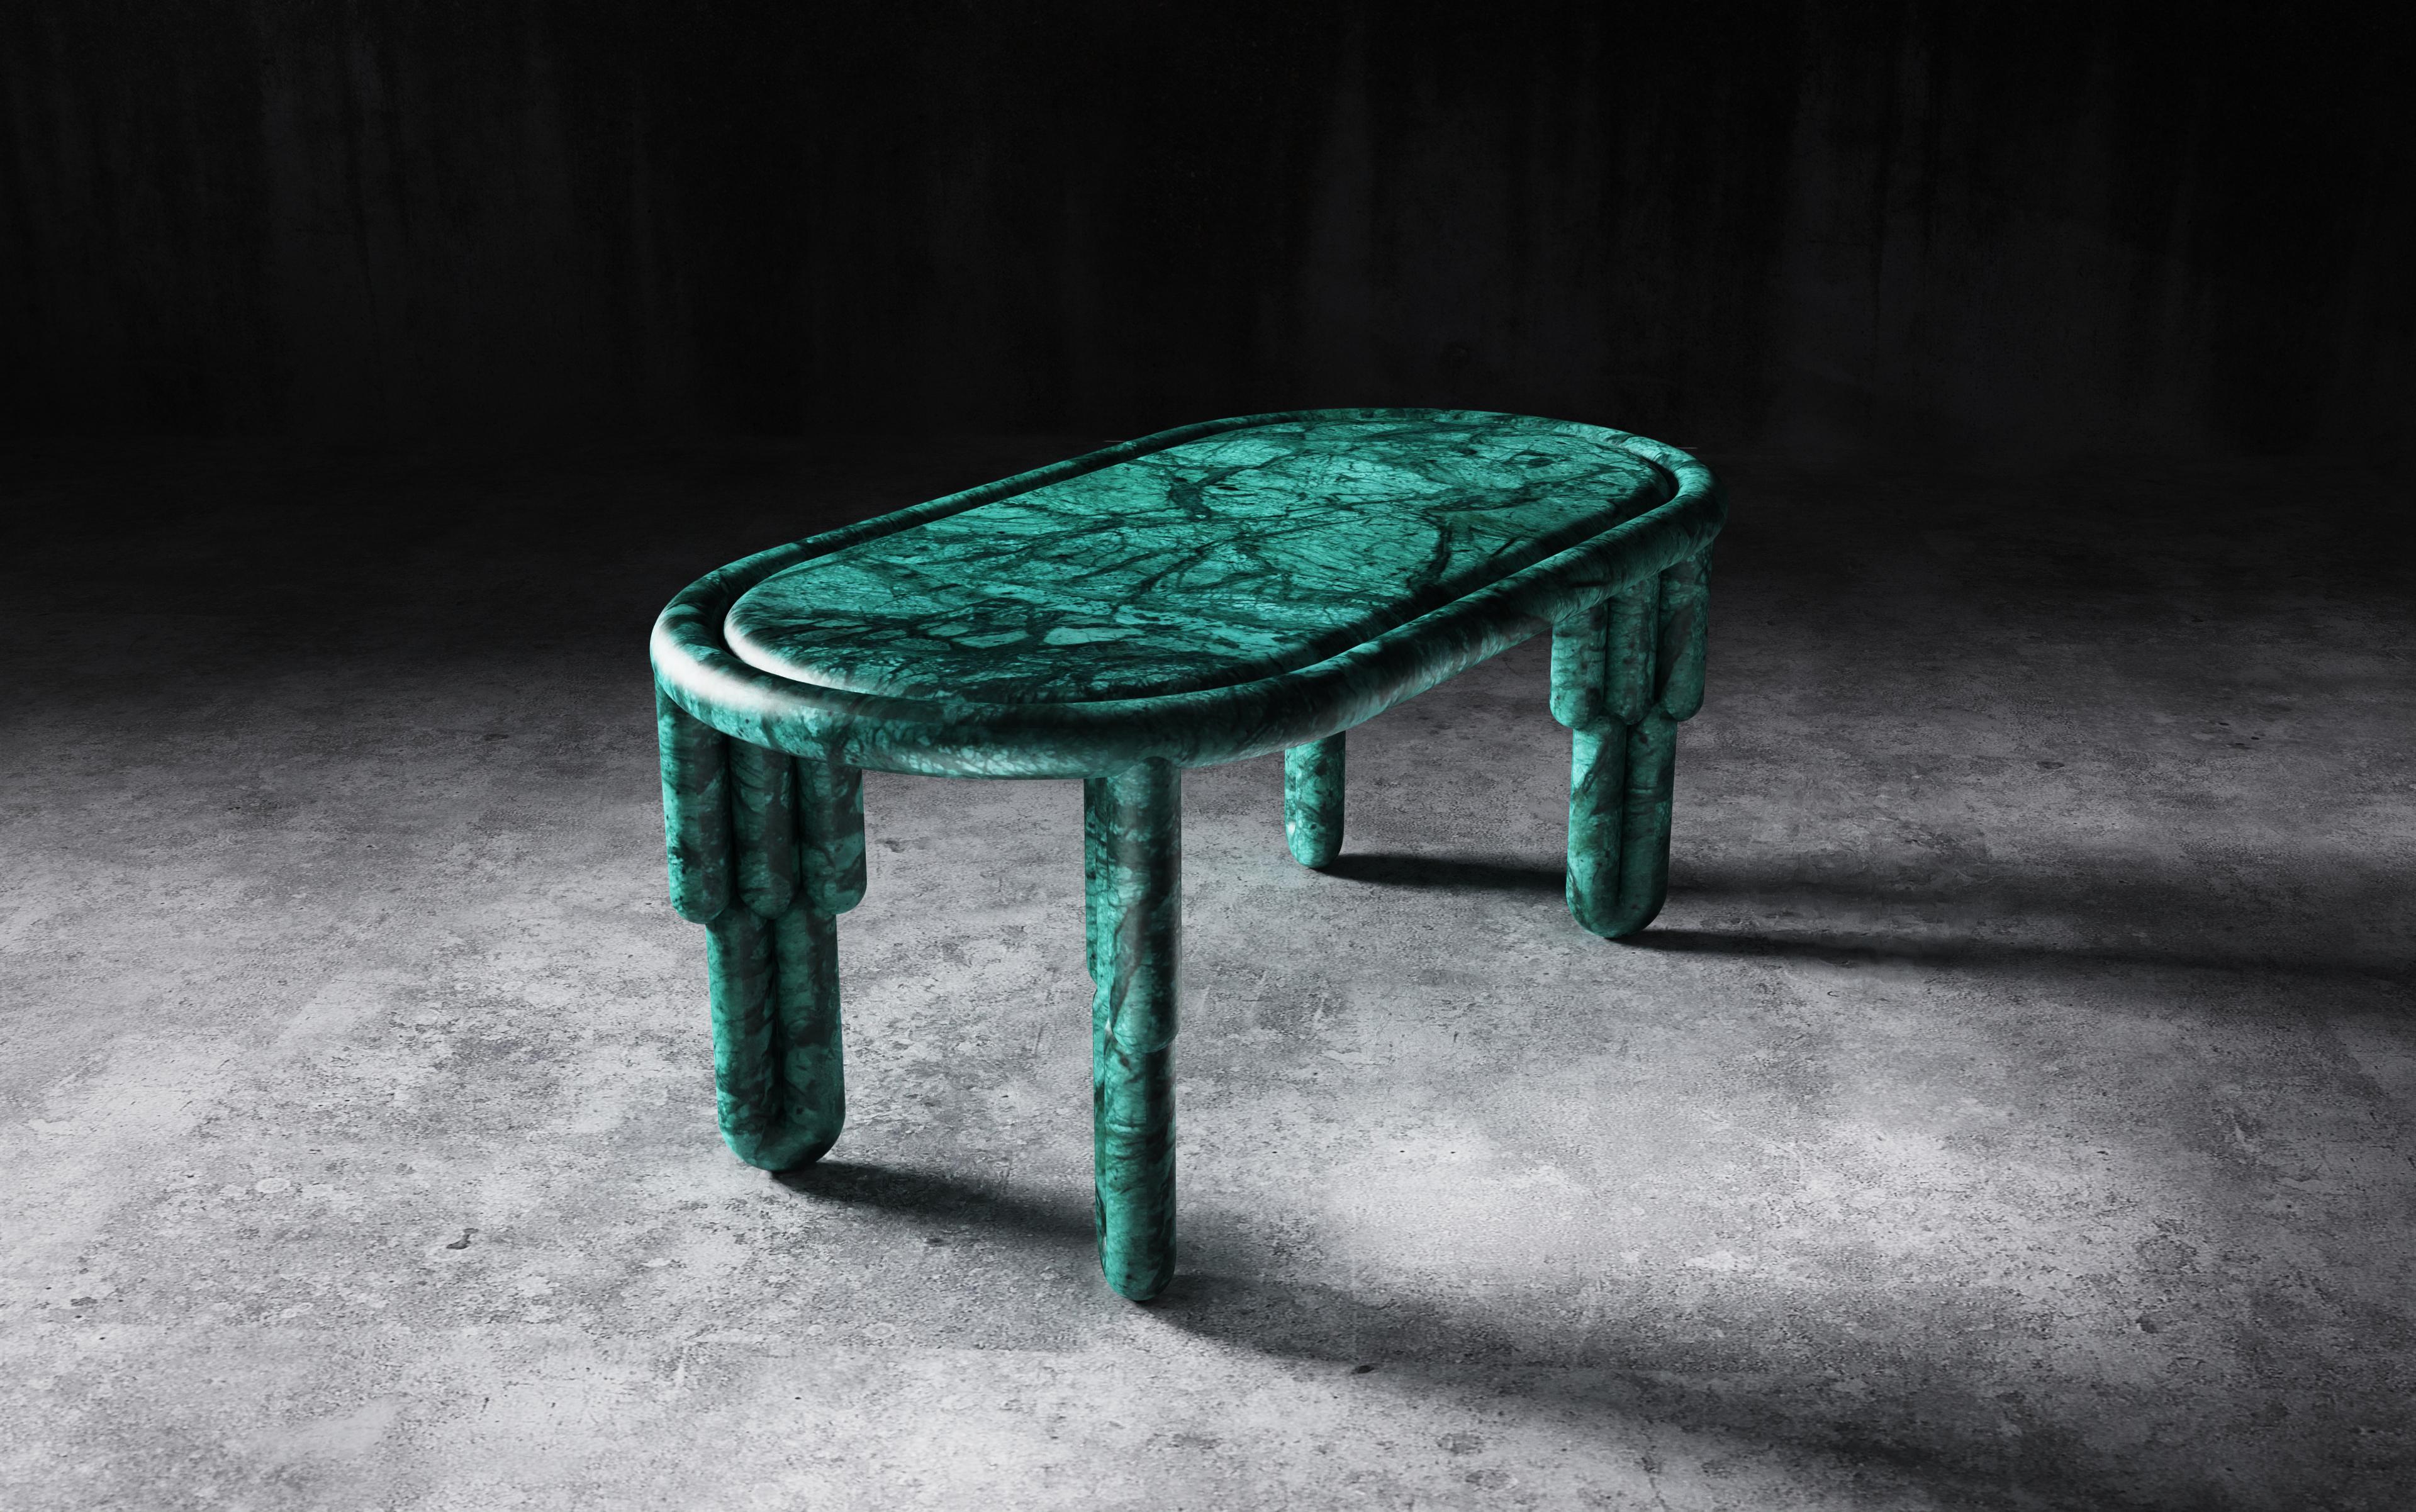 Contemporary Sculptural Kipferl Dining Table by Lara Bohinc in Rosa Portugalo Marble For Sale